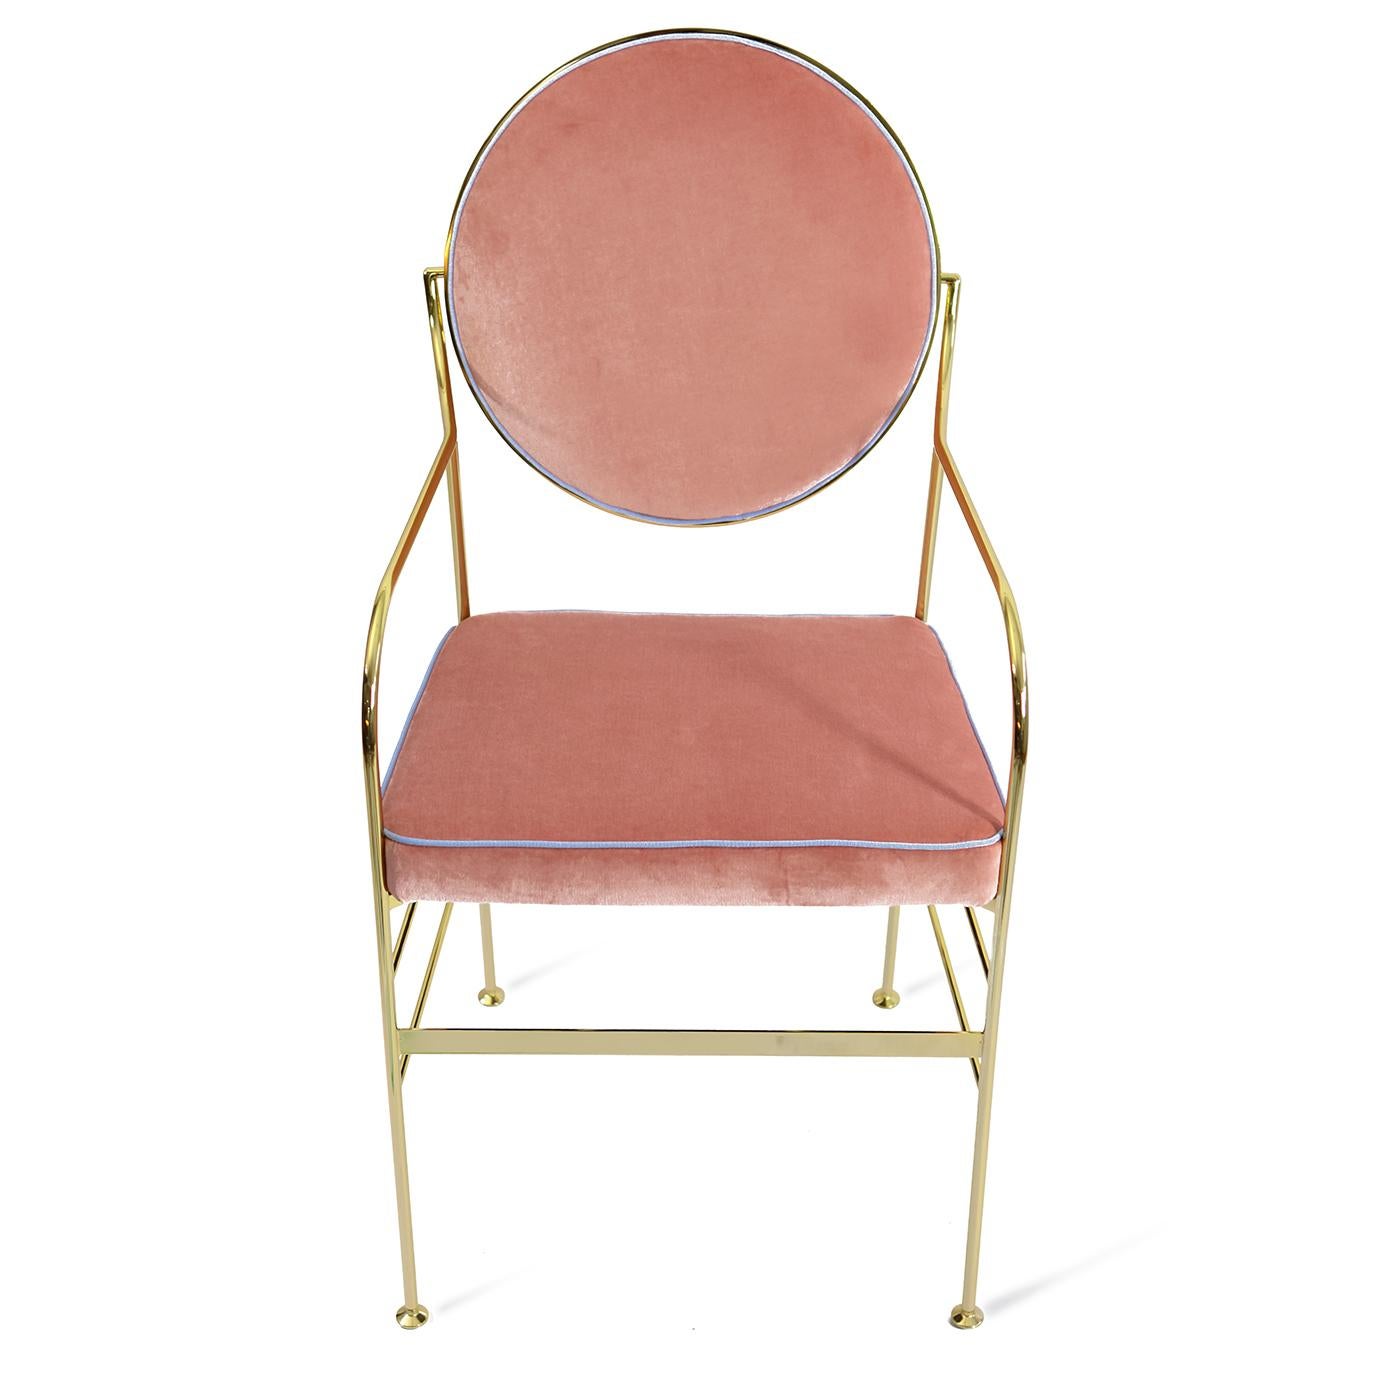 Inspired by the elegance of the Louis chair, this playful and modern design is a superb addition to a contemporary interior, where it will add a touch of delicate color to any room in the house. Its 24-karat gold plated-iron frame is light and airy